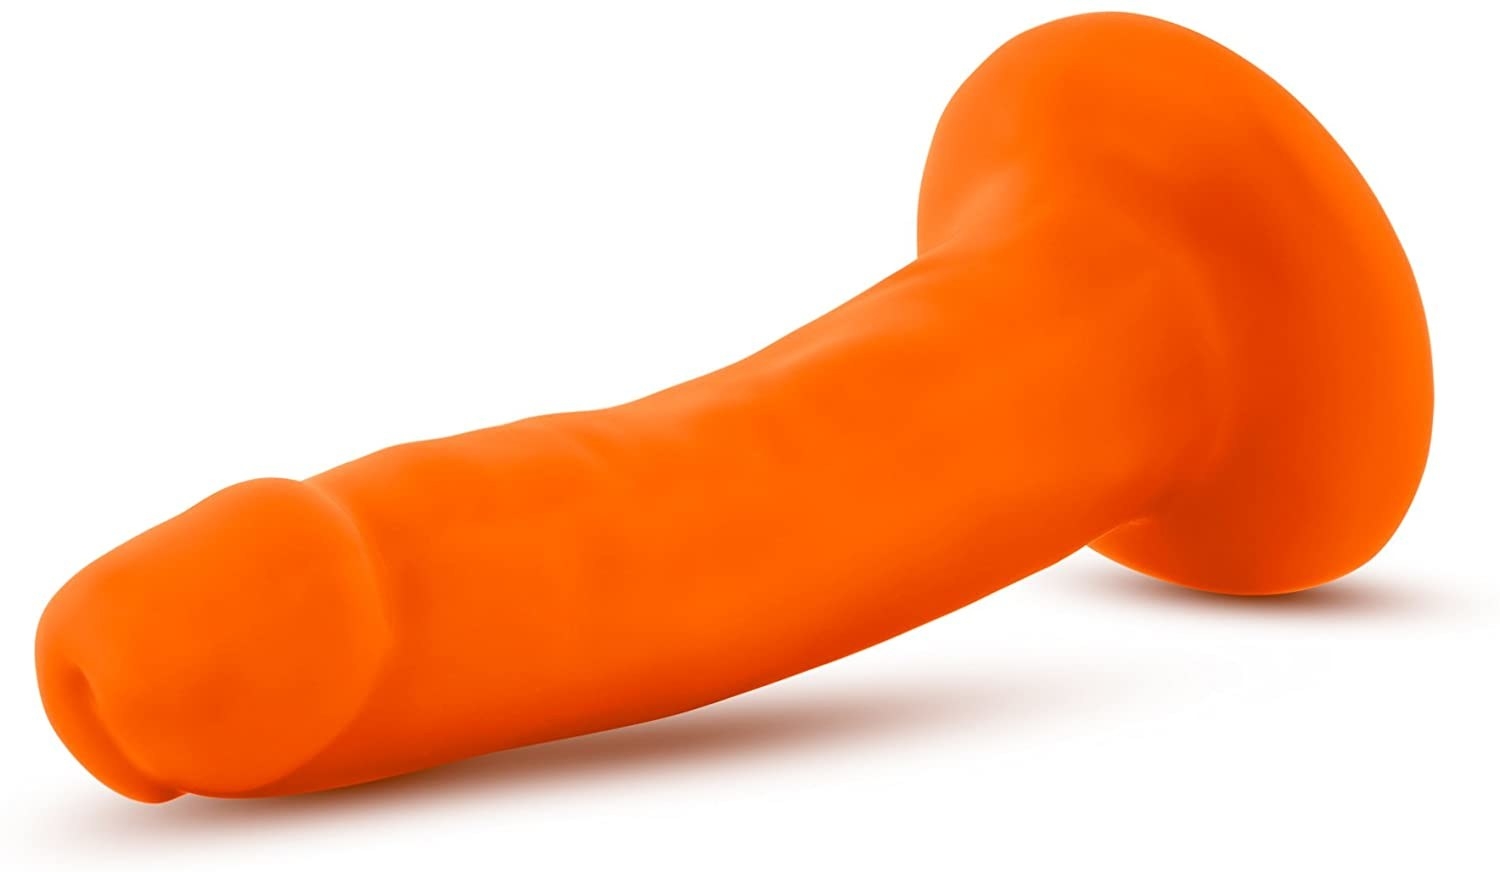 Orange dildo with suction cup base